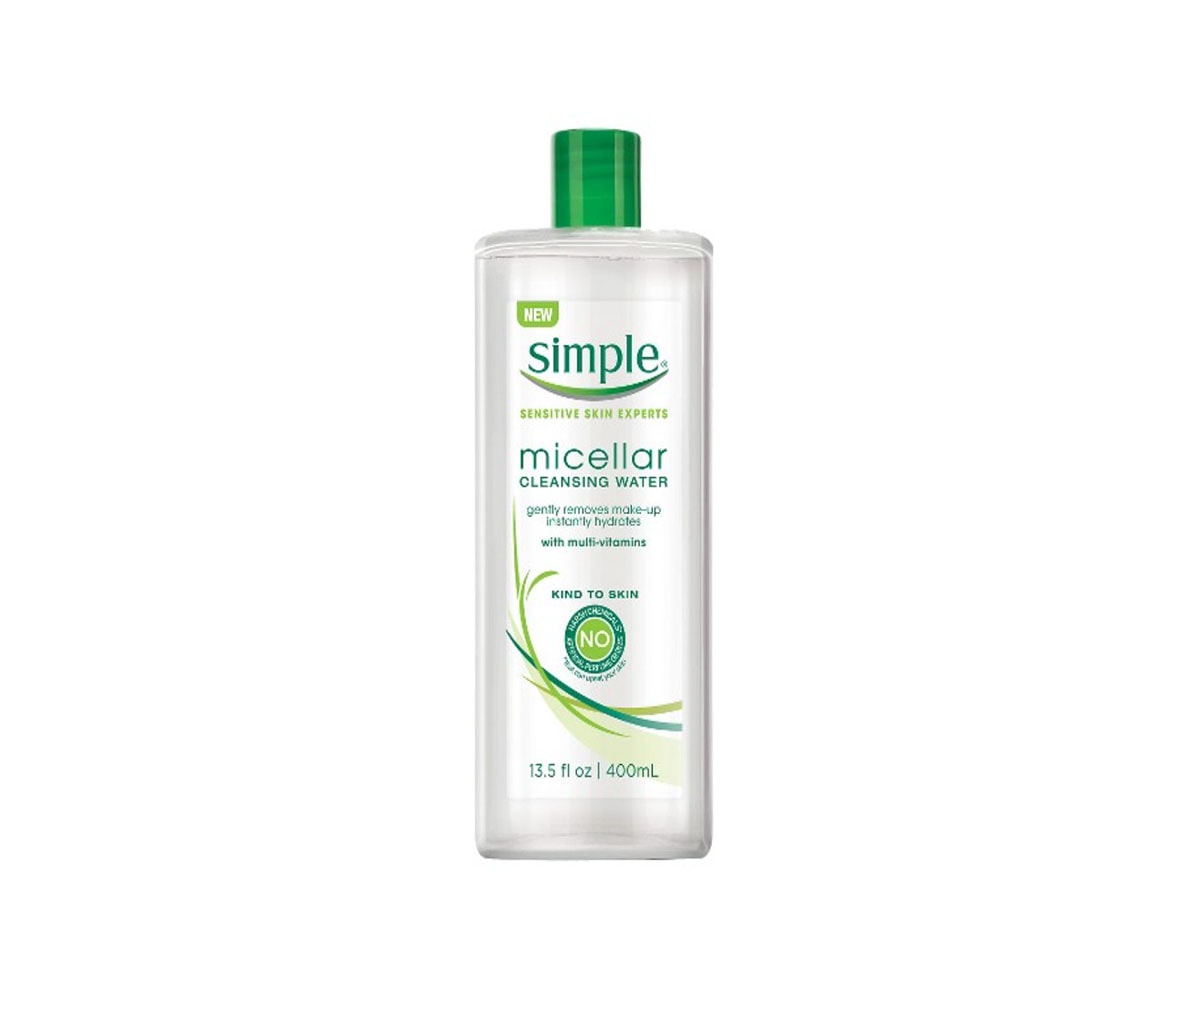 Best makeup remover for sensitive skin: Simple micellar cleansing water